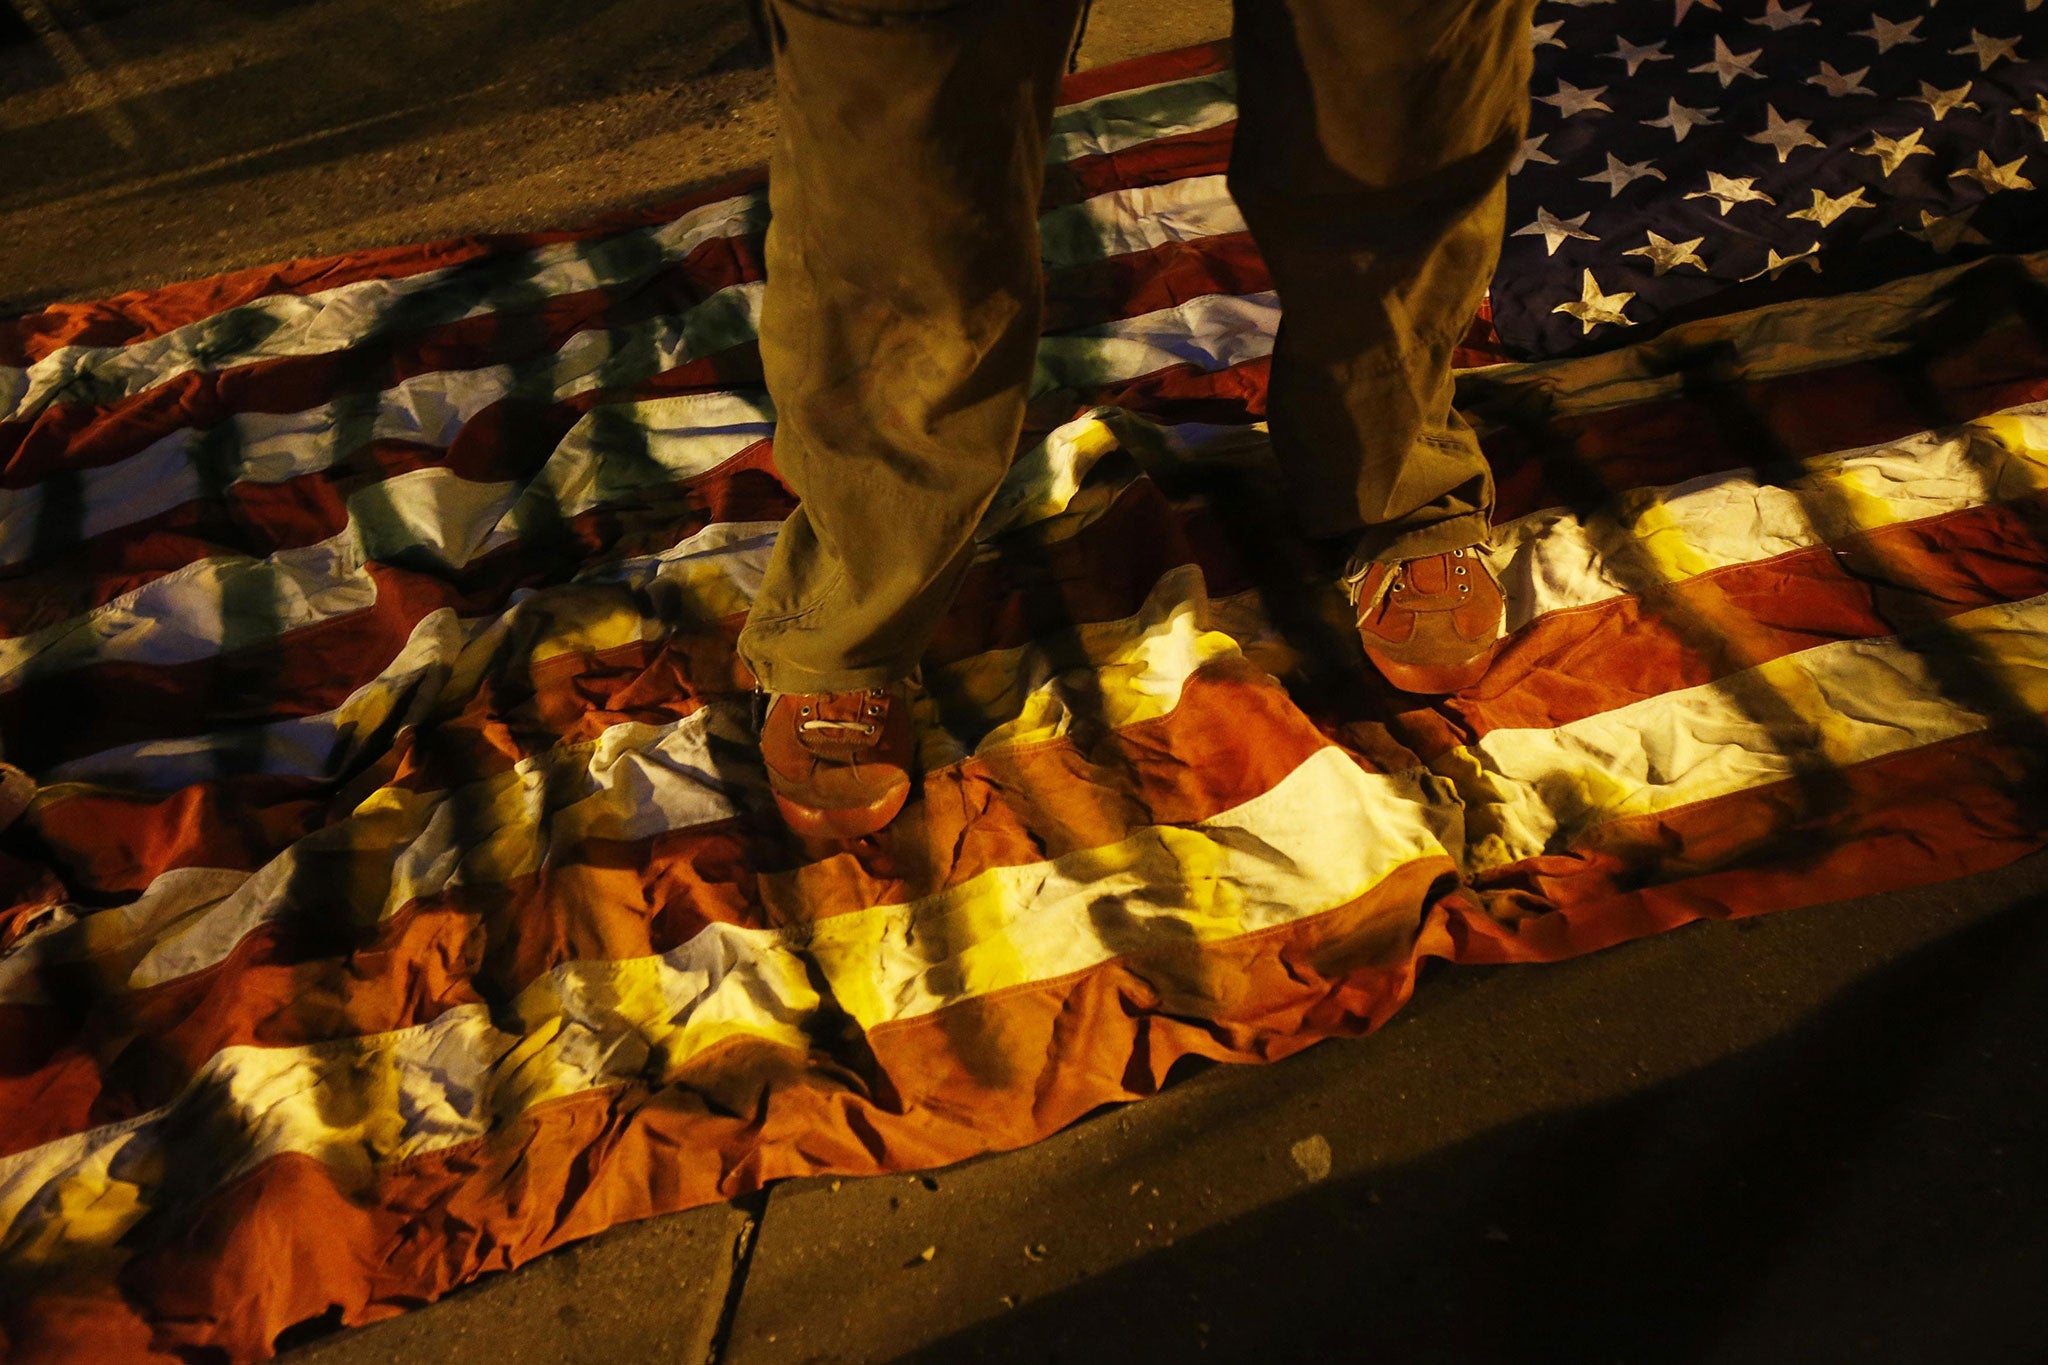 A demonstrator steps on a graffiti-sprayed American flag during a protest in Oakland, California following the grand jury decision in Ferguson